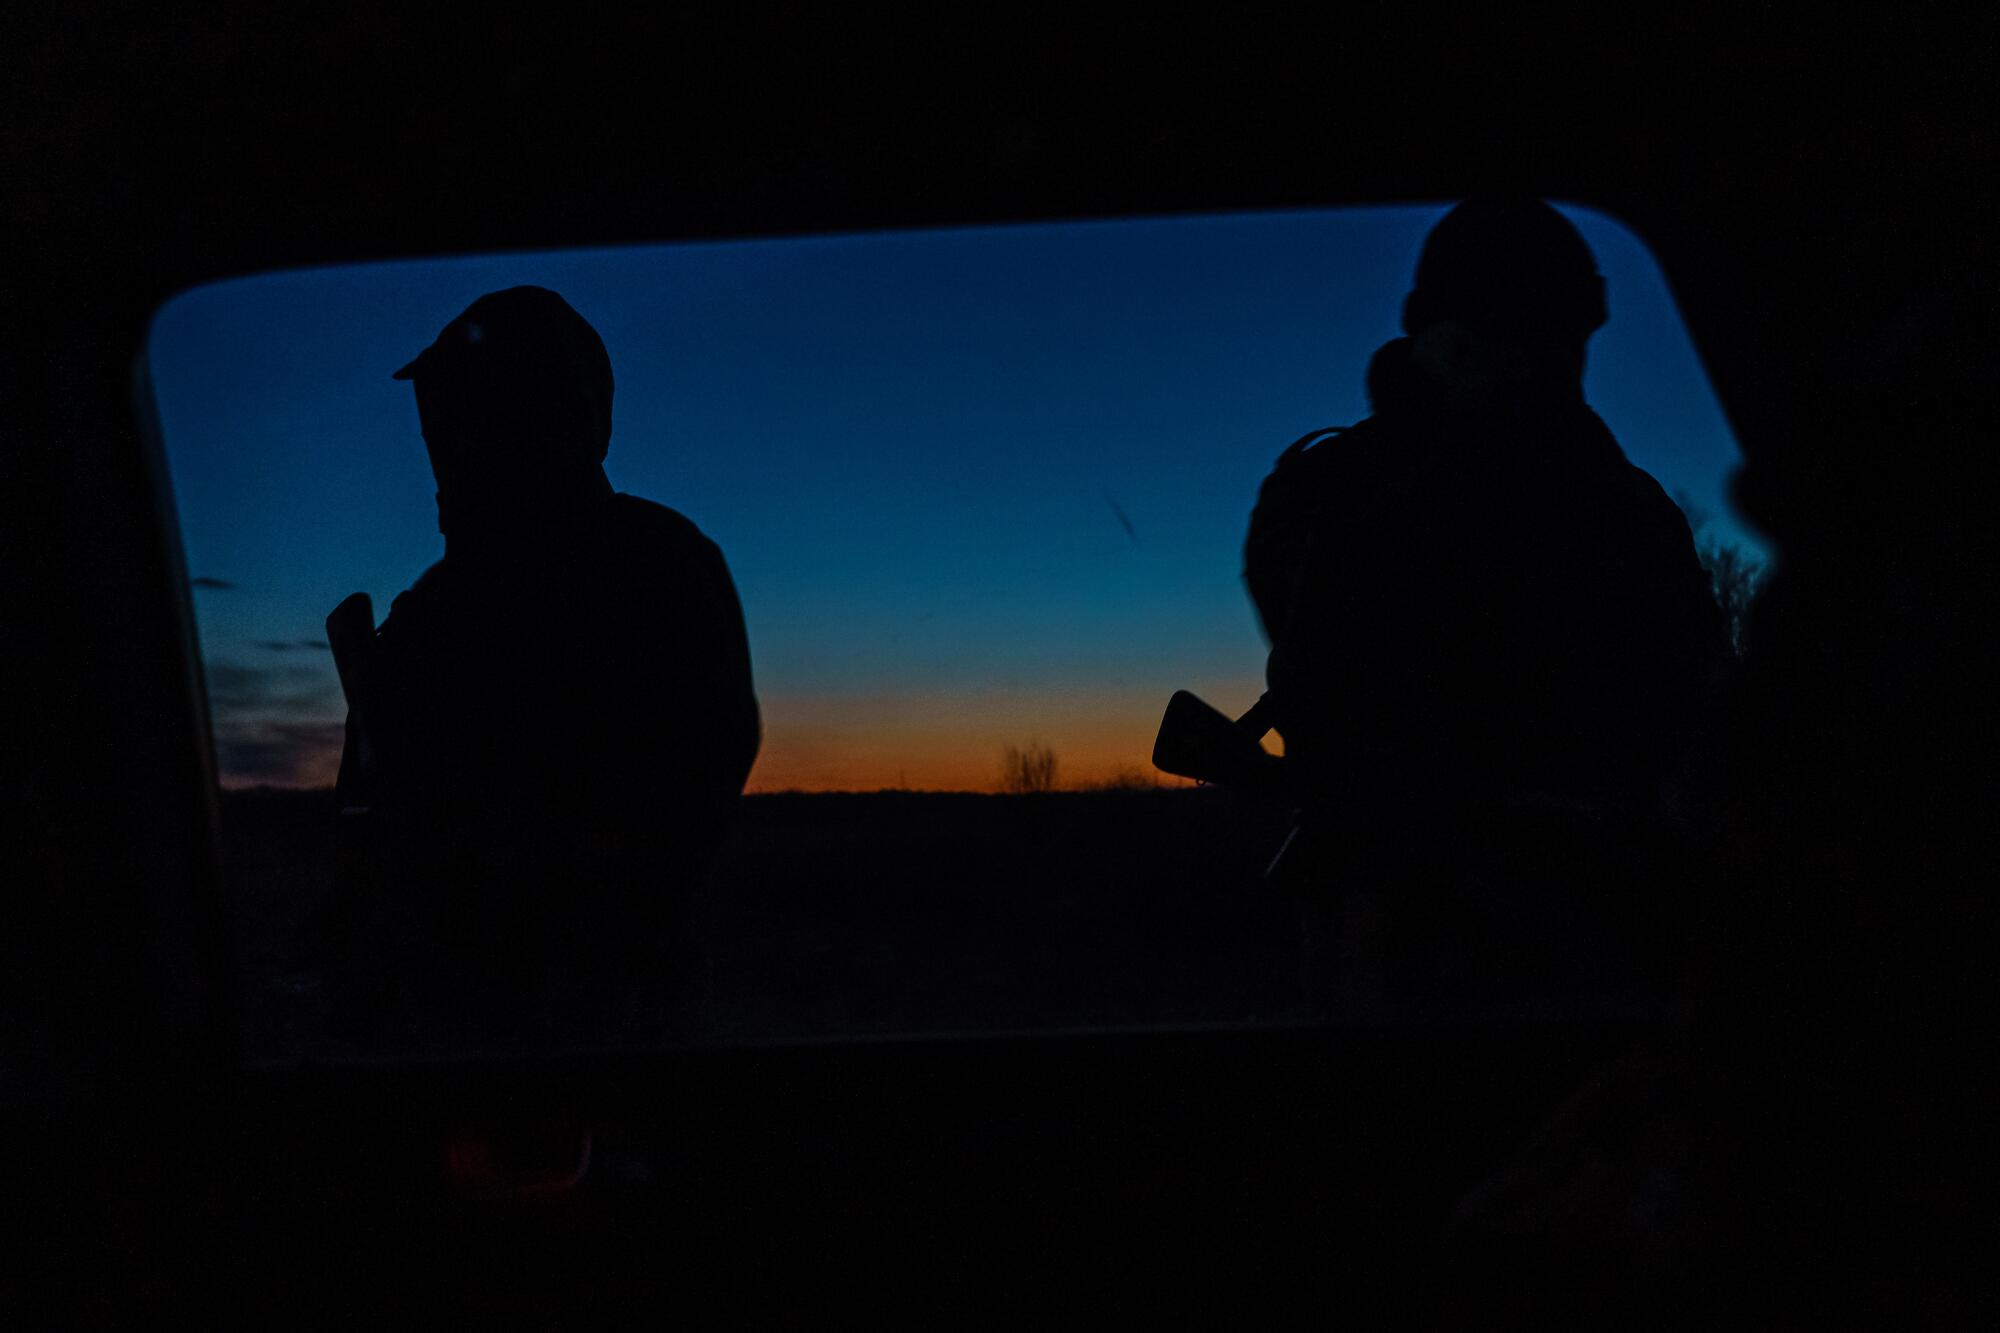 Volunteer fighters stand outside vehicle while identification is verified.